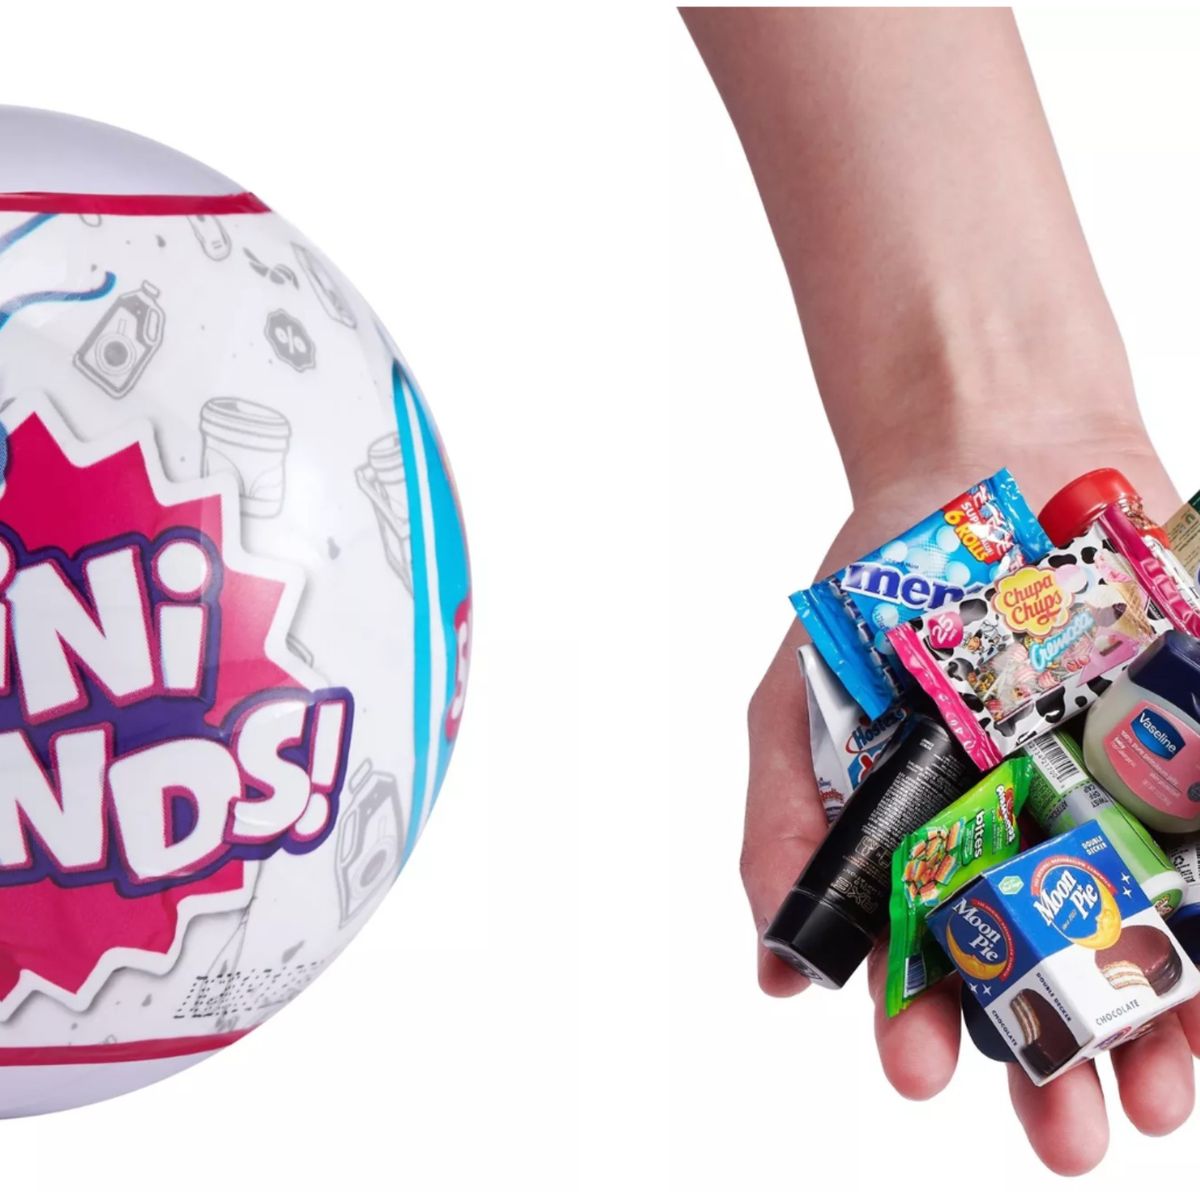 Mystery Balls Filled With Mini Plastic Food Items Are Going Viral